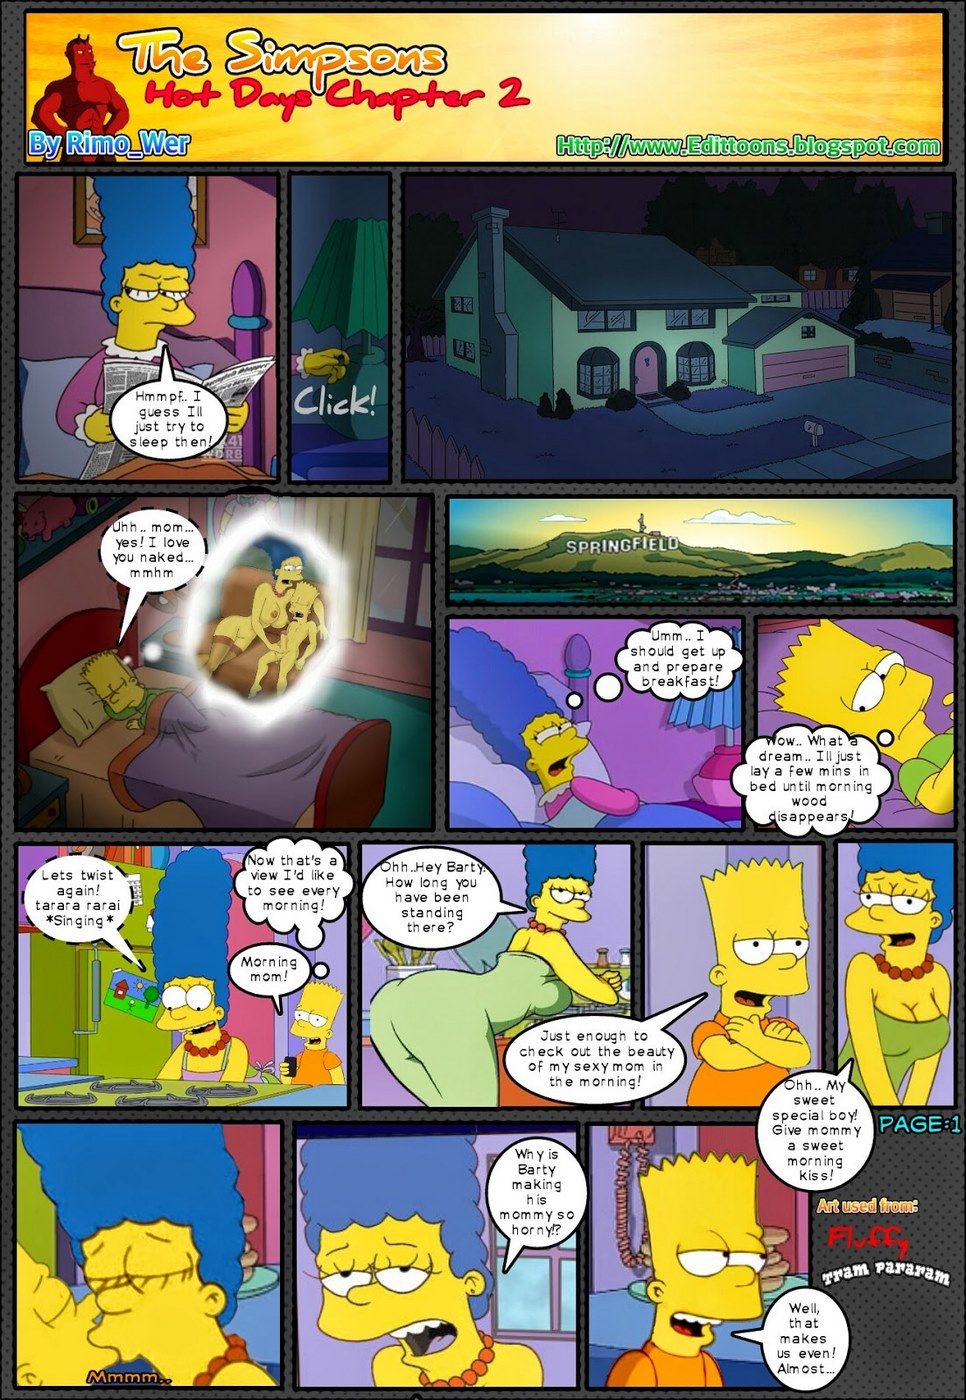 Rimo Wer - The Simpsons Hot Days 2 page 1